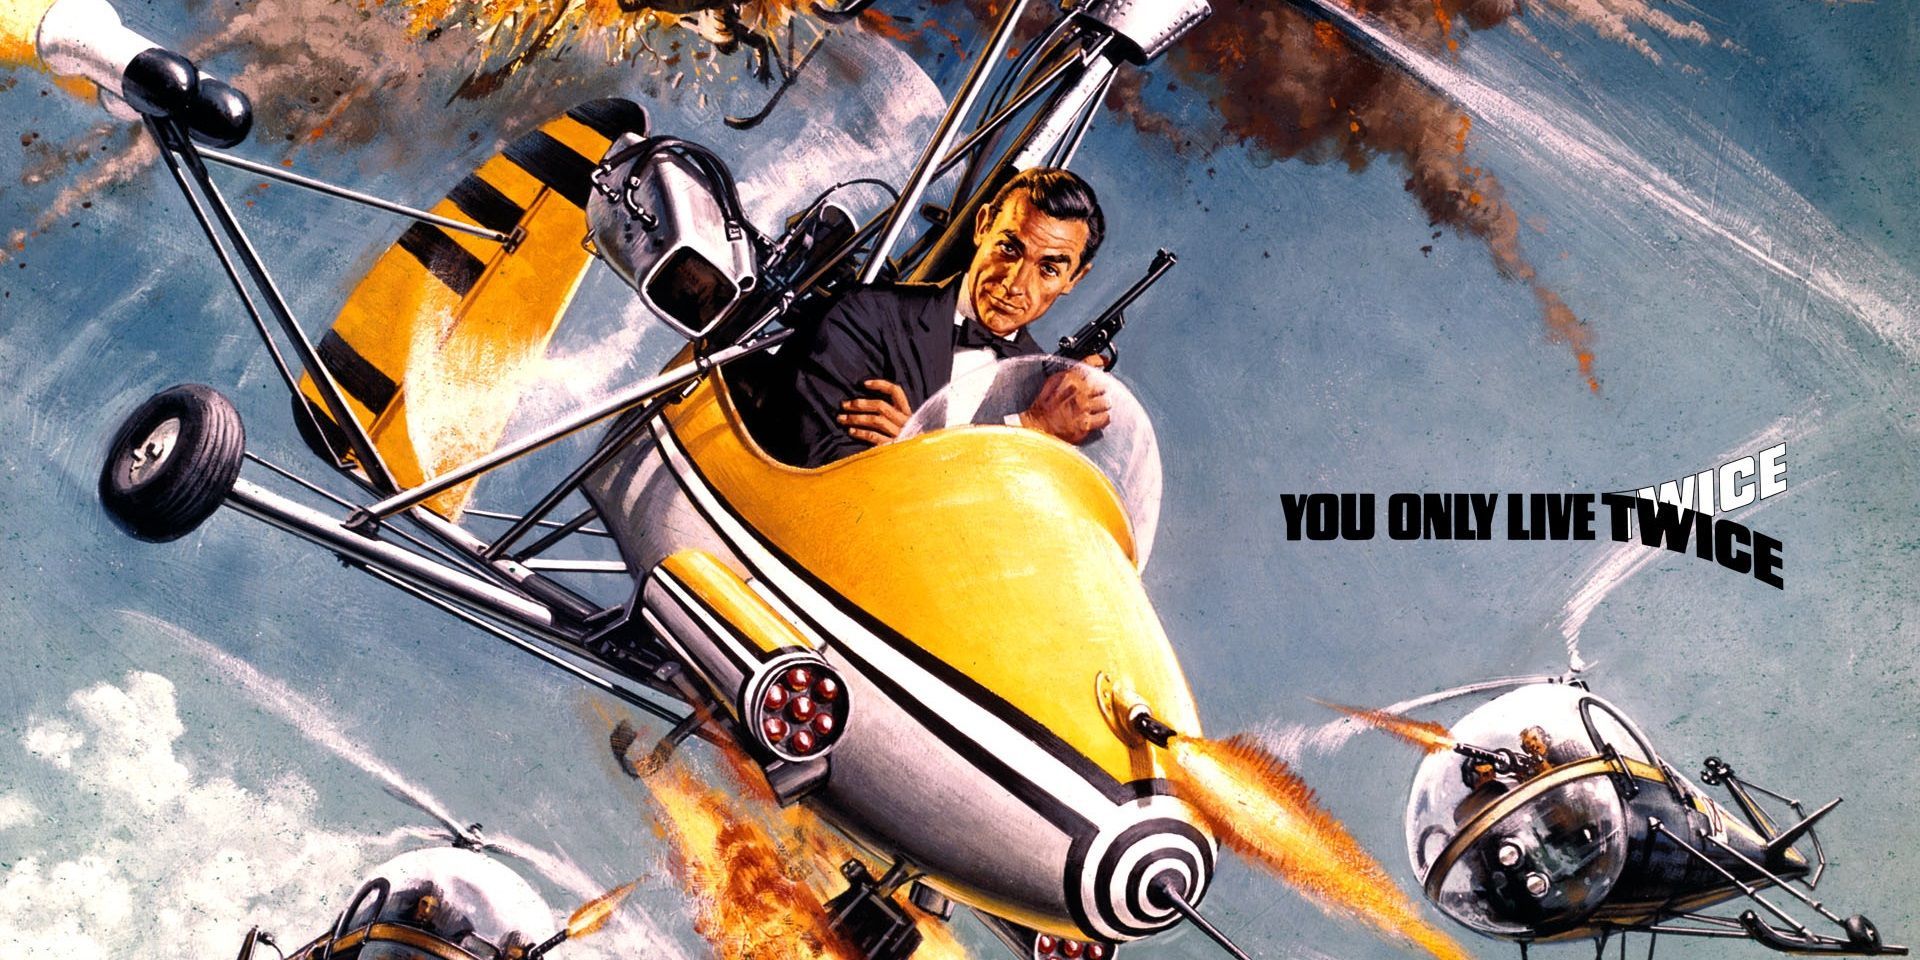 Snapshot of the poster for You Only Live Twice. Sean Connery's James Bond sits in the cockpit of Little Nellie firing its weapons while other helicopters are in pursuit.